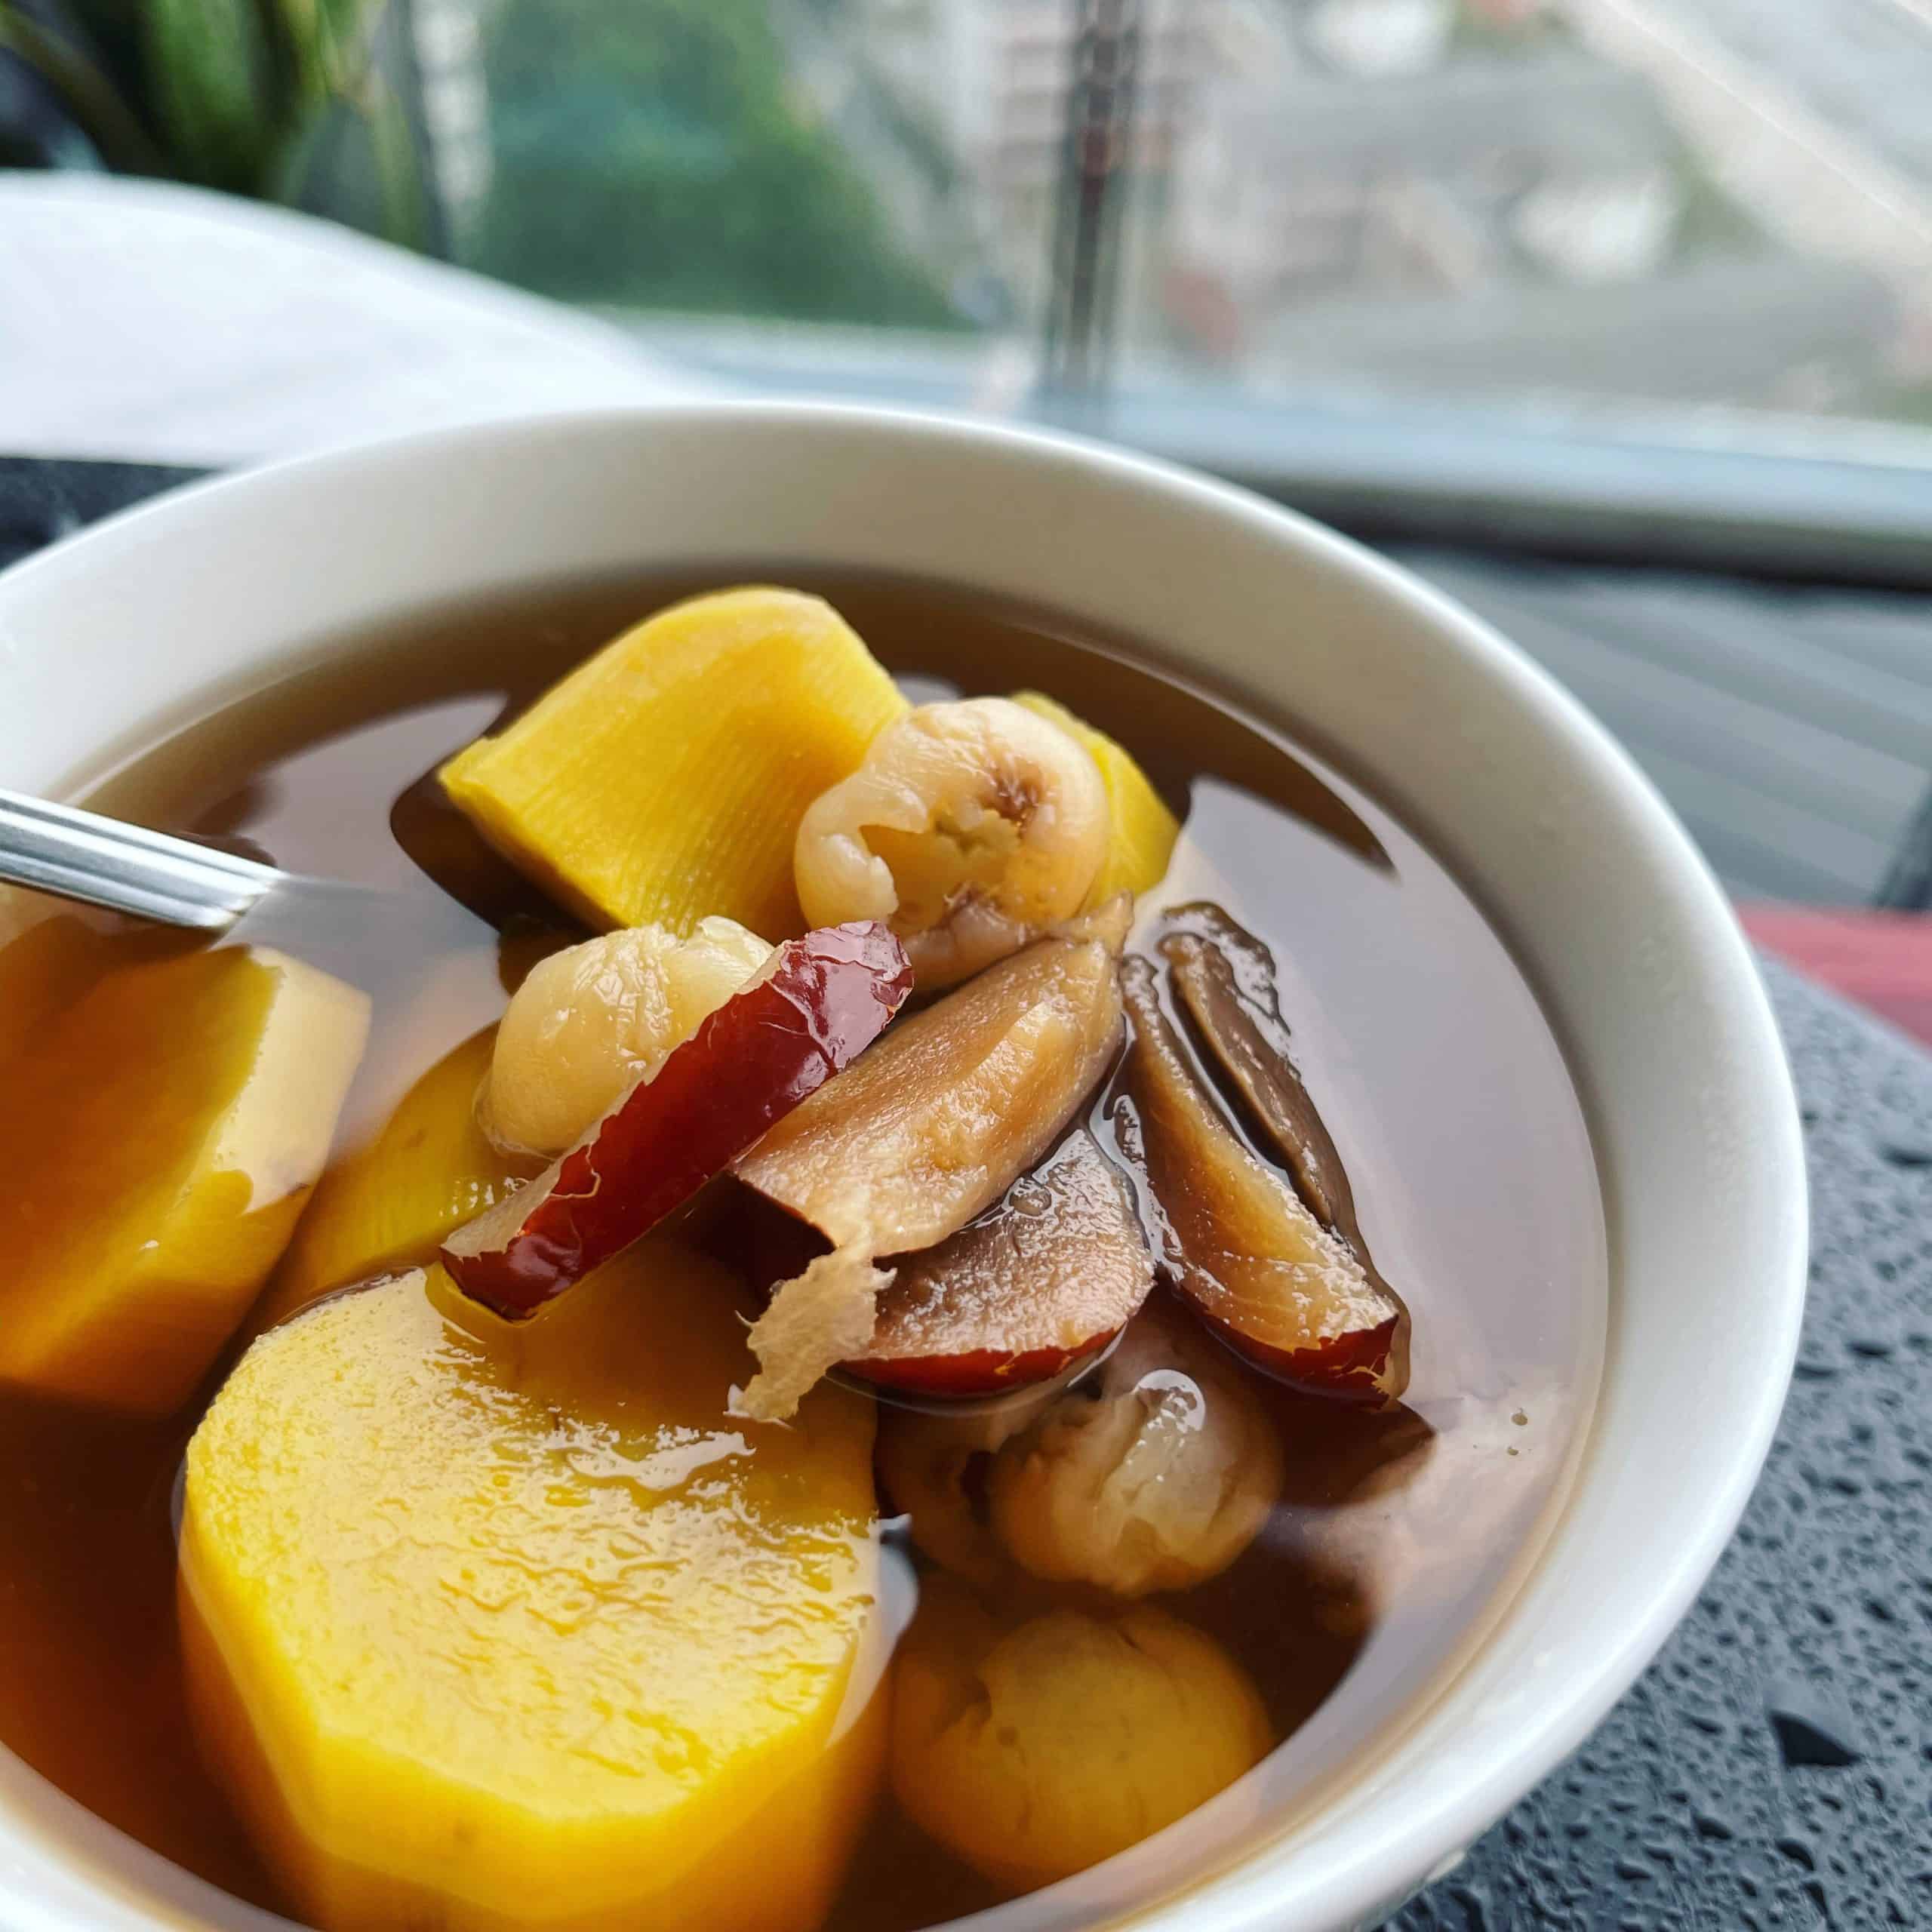 My Wok Life Cooking Blog - Honey Sweet Potato & Ginger Soup (地瓜甜姜汤) : Steaming Hot Soup for Rainy Day - Lotus Seed Dessert Soup Recipe